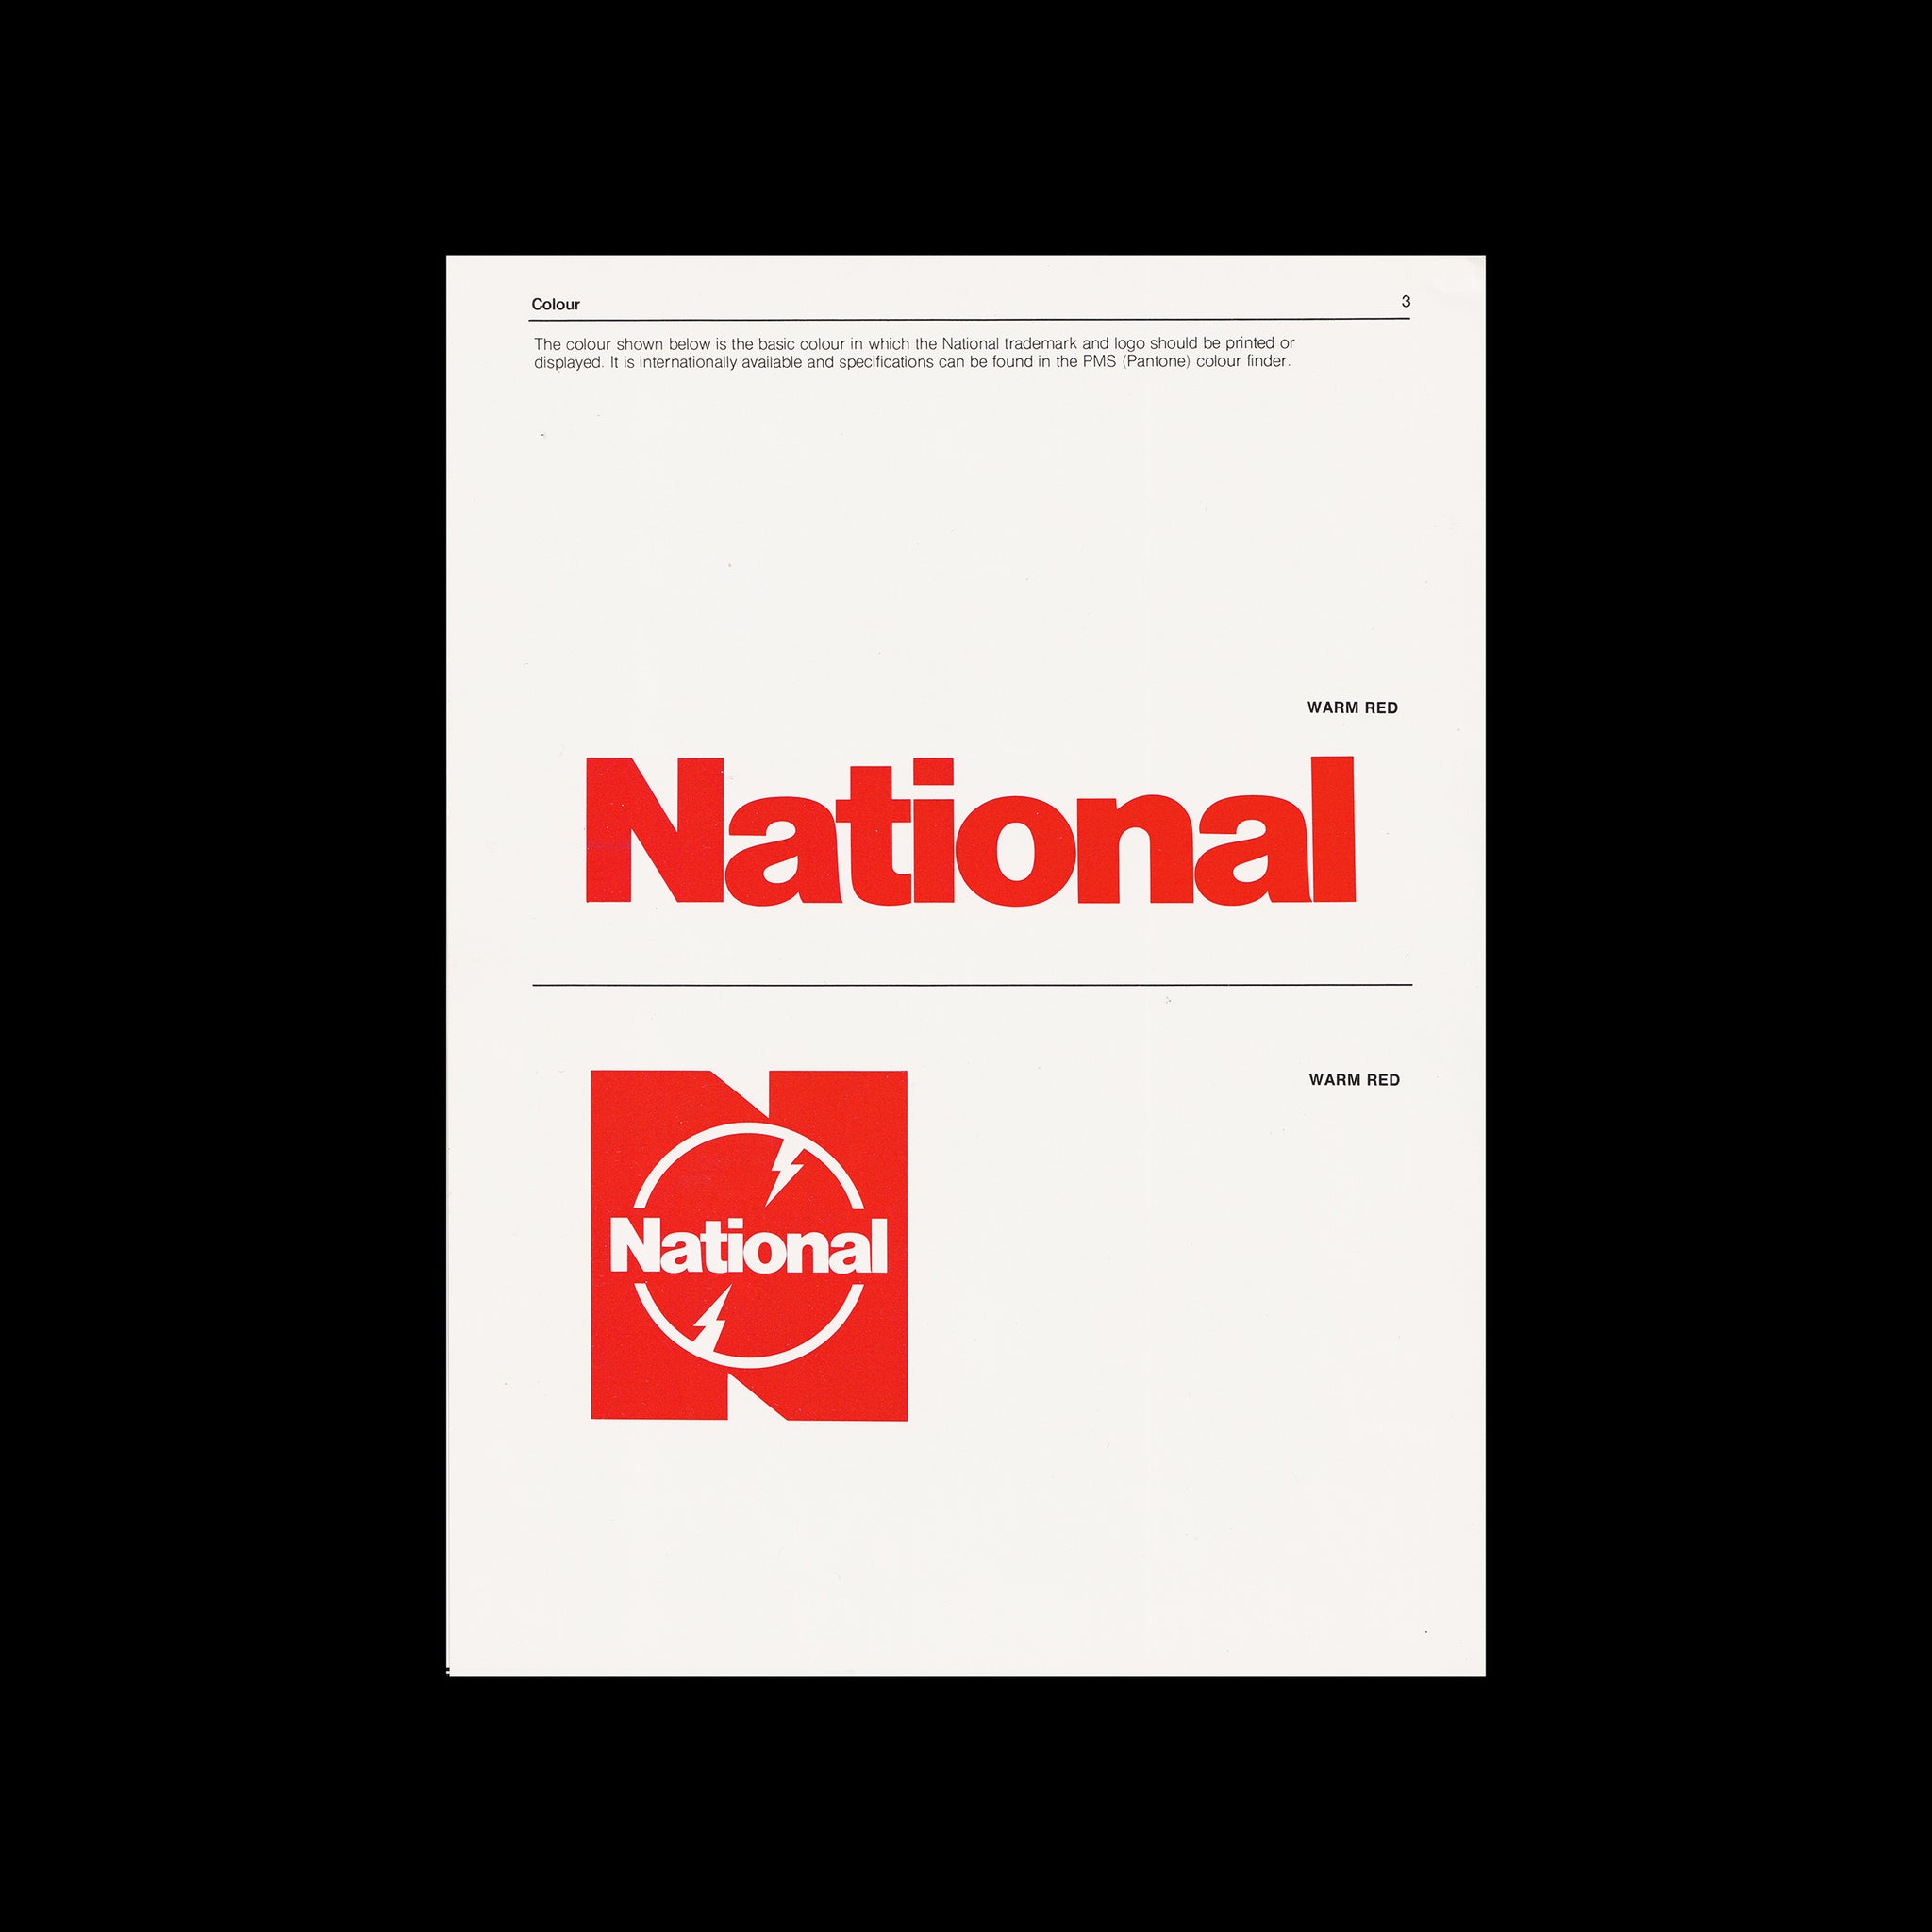 National Brand Identity Guidelines, 1973